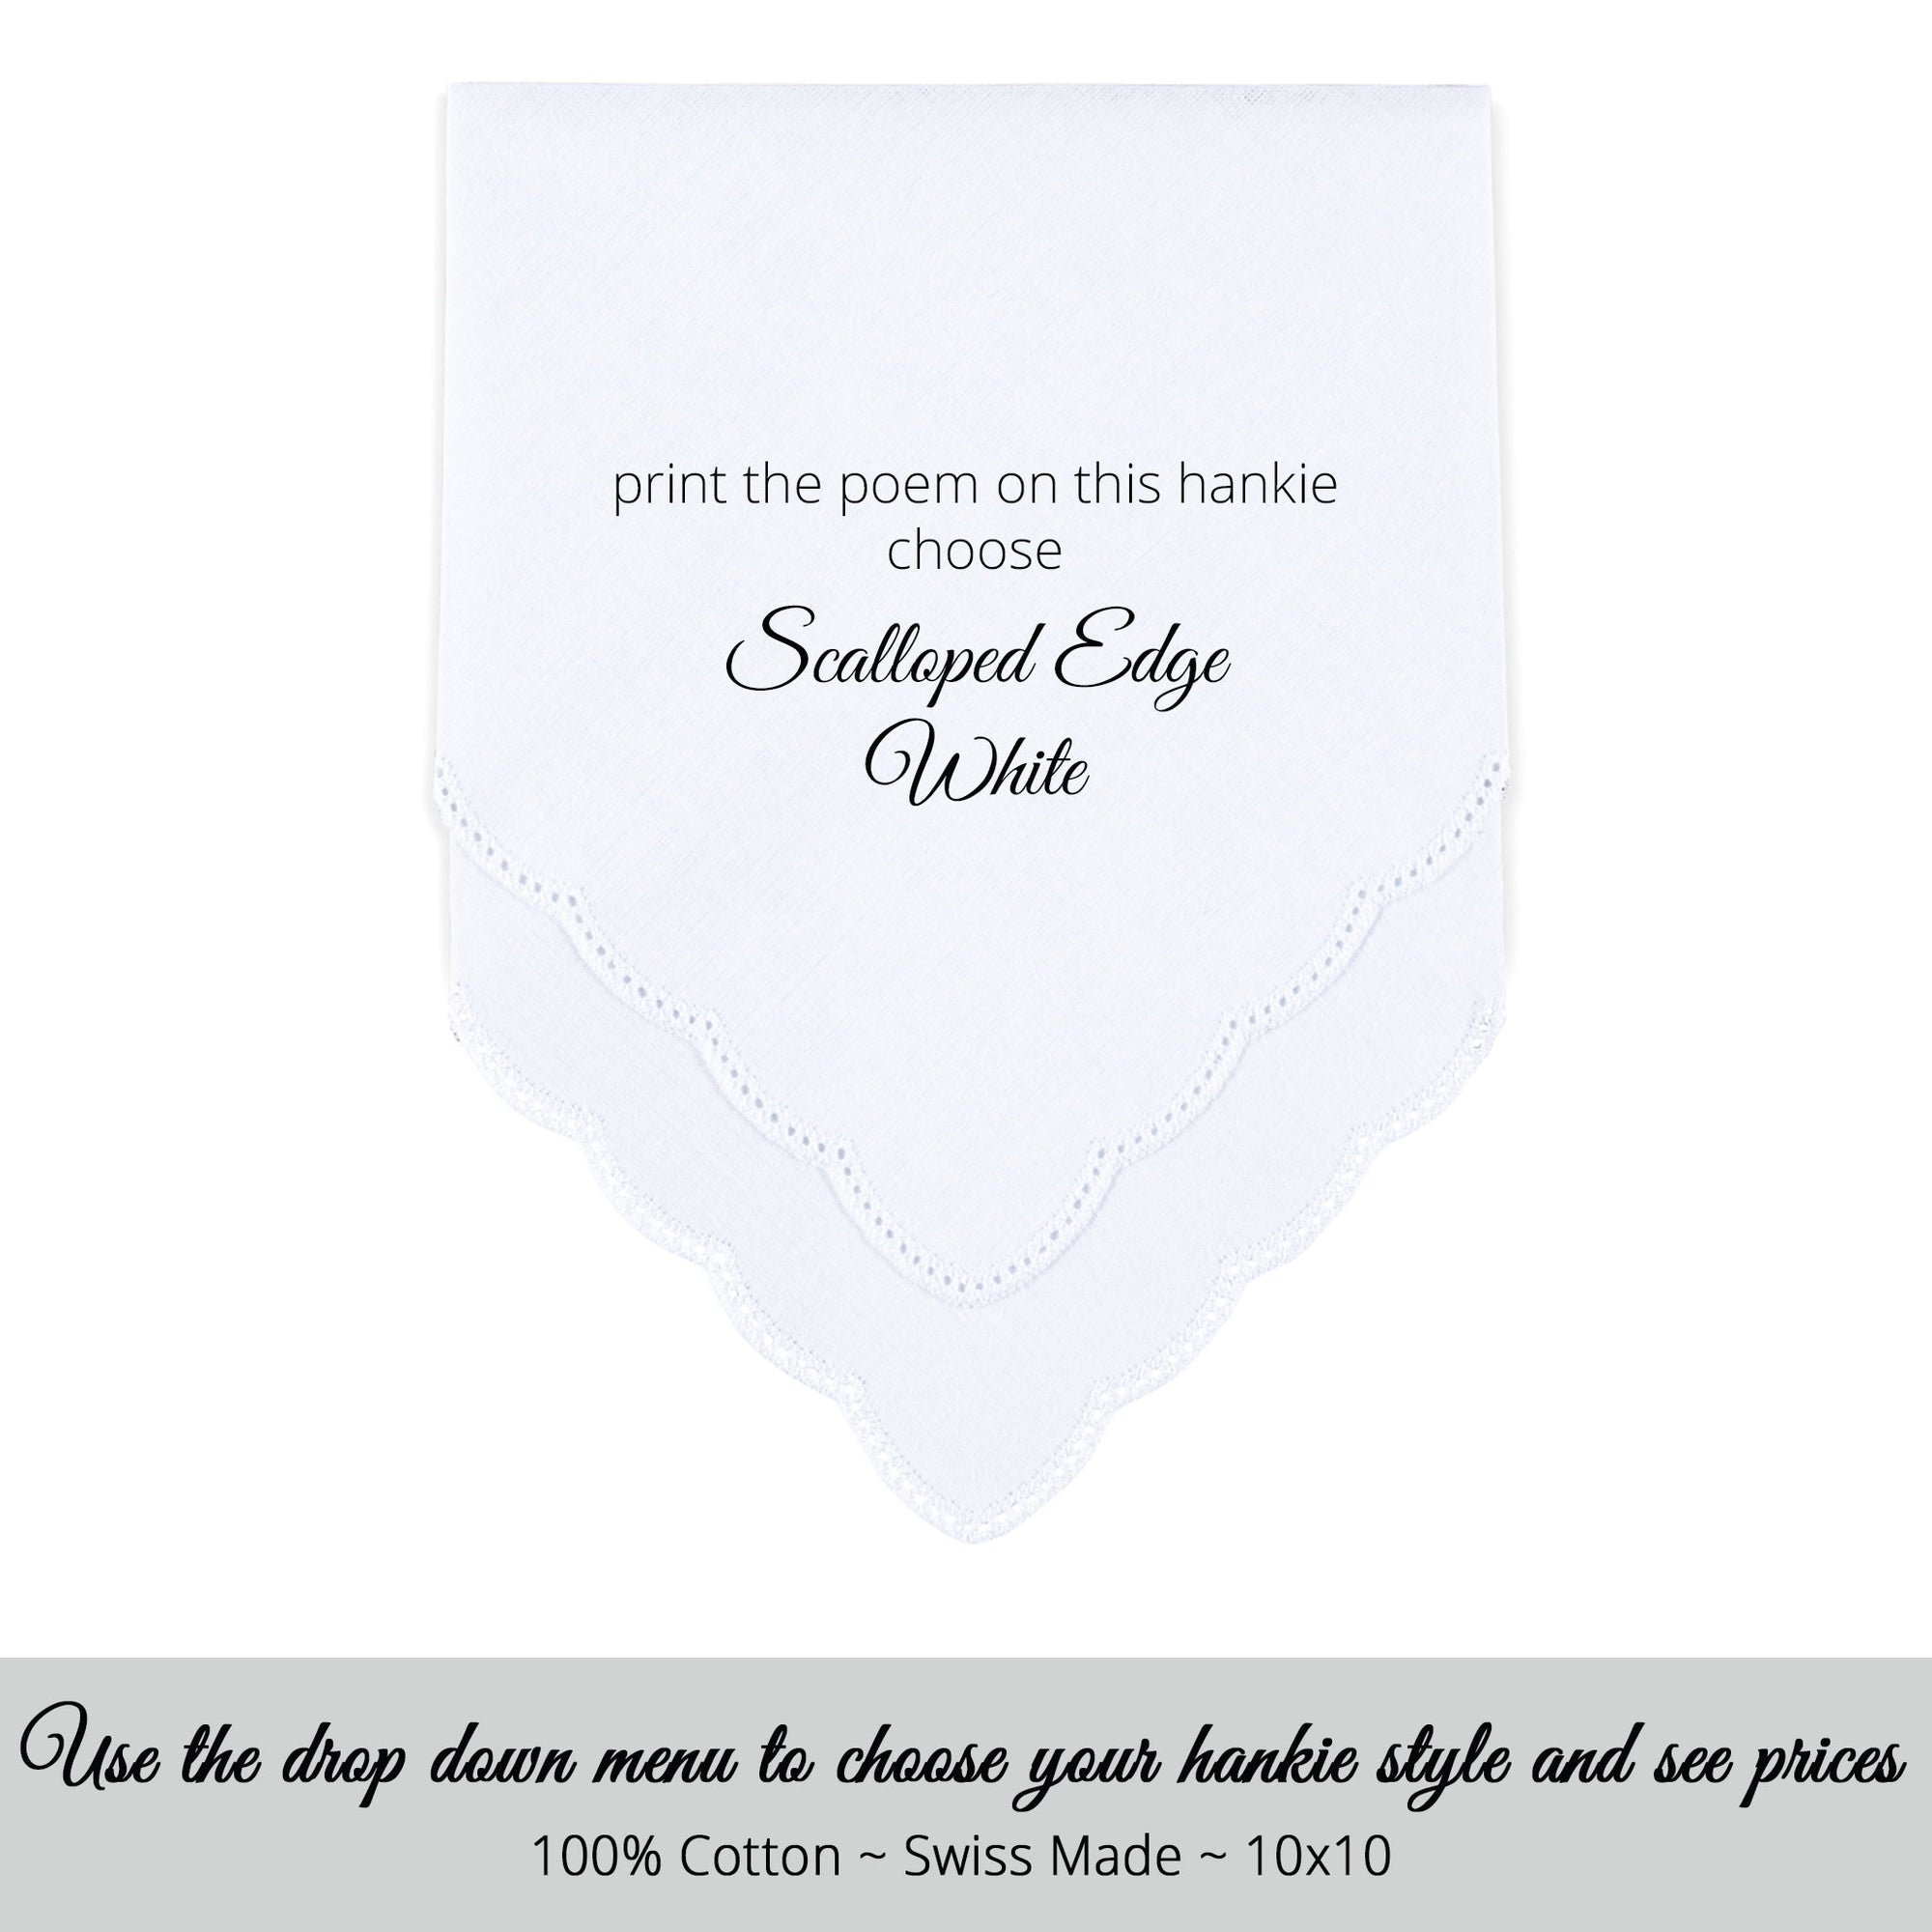 Wedding Handkerchief Scalloped edge white personalized poem for the grandmother of the bride